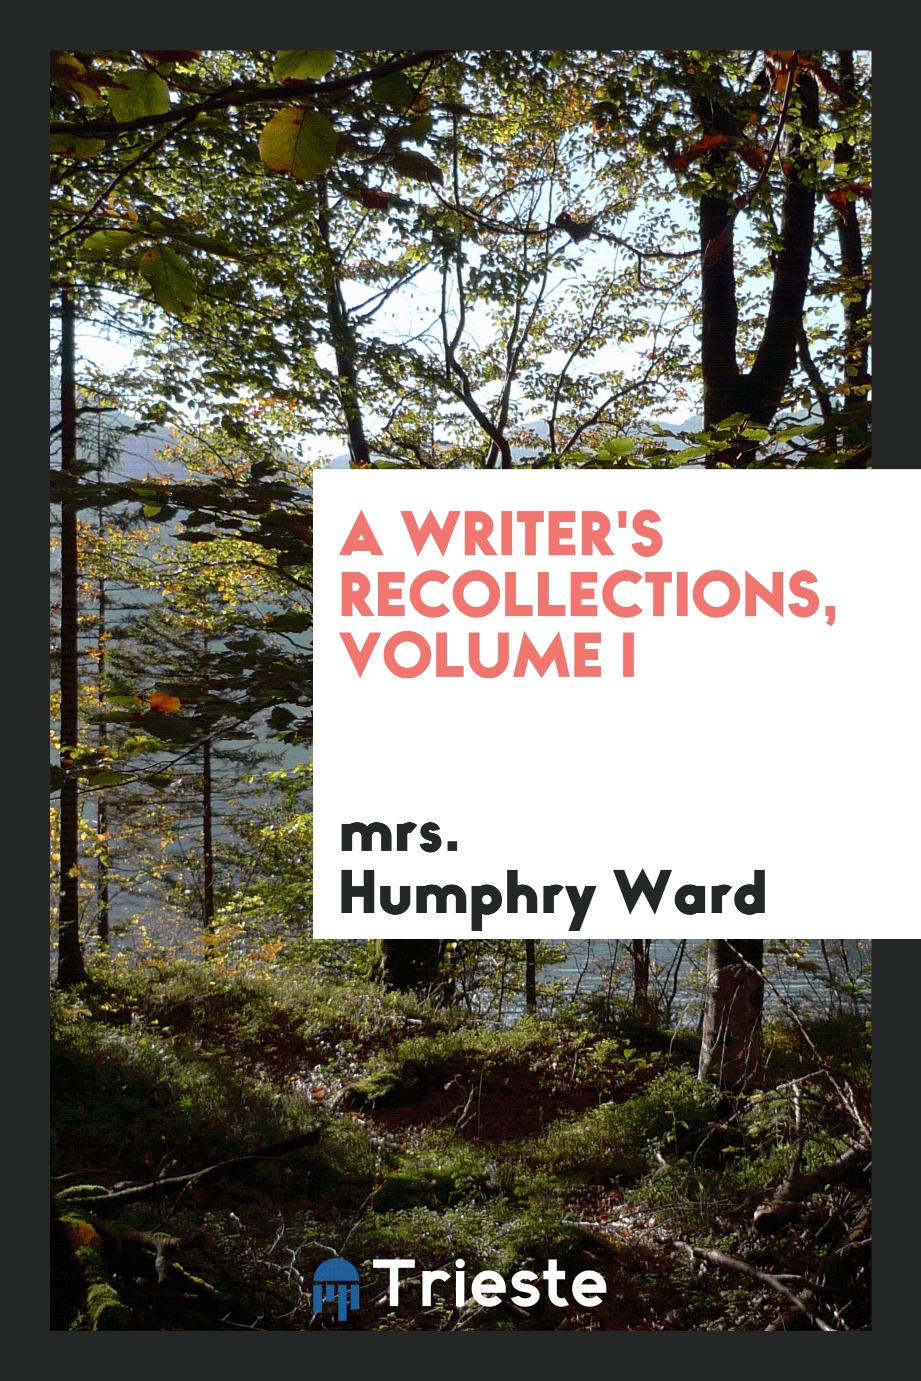 A writer's recollections, volume I